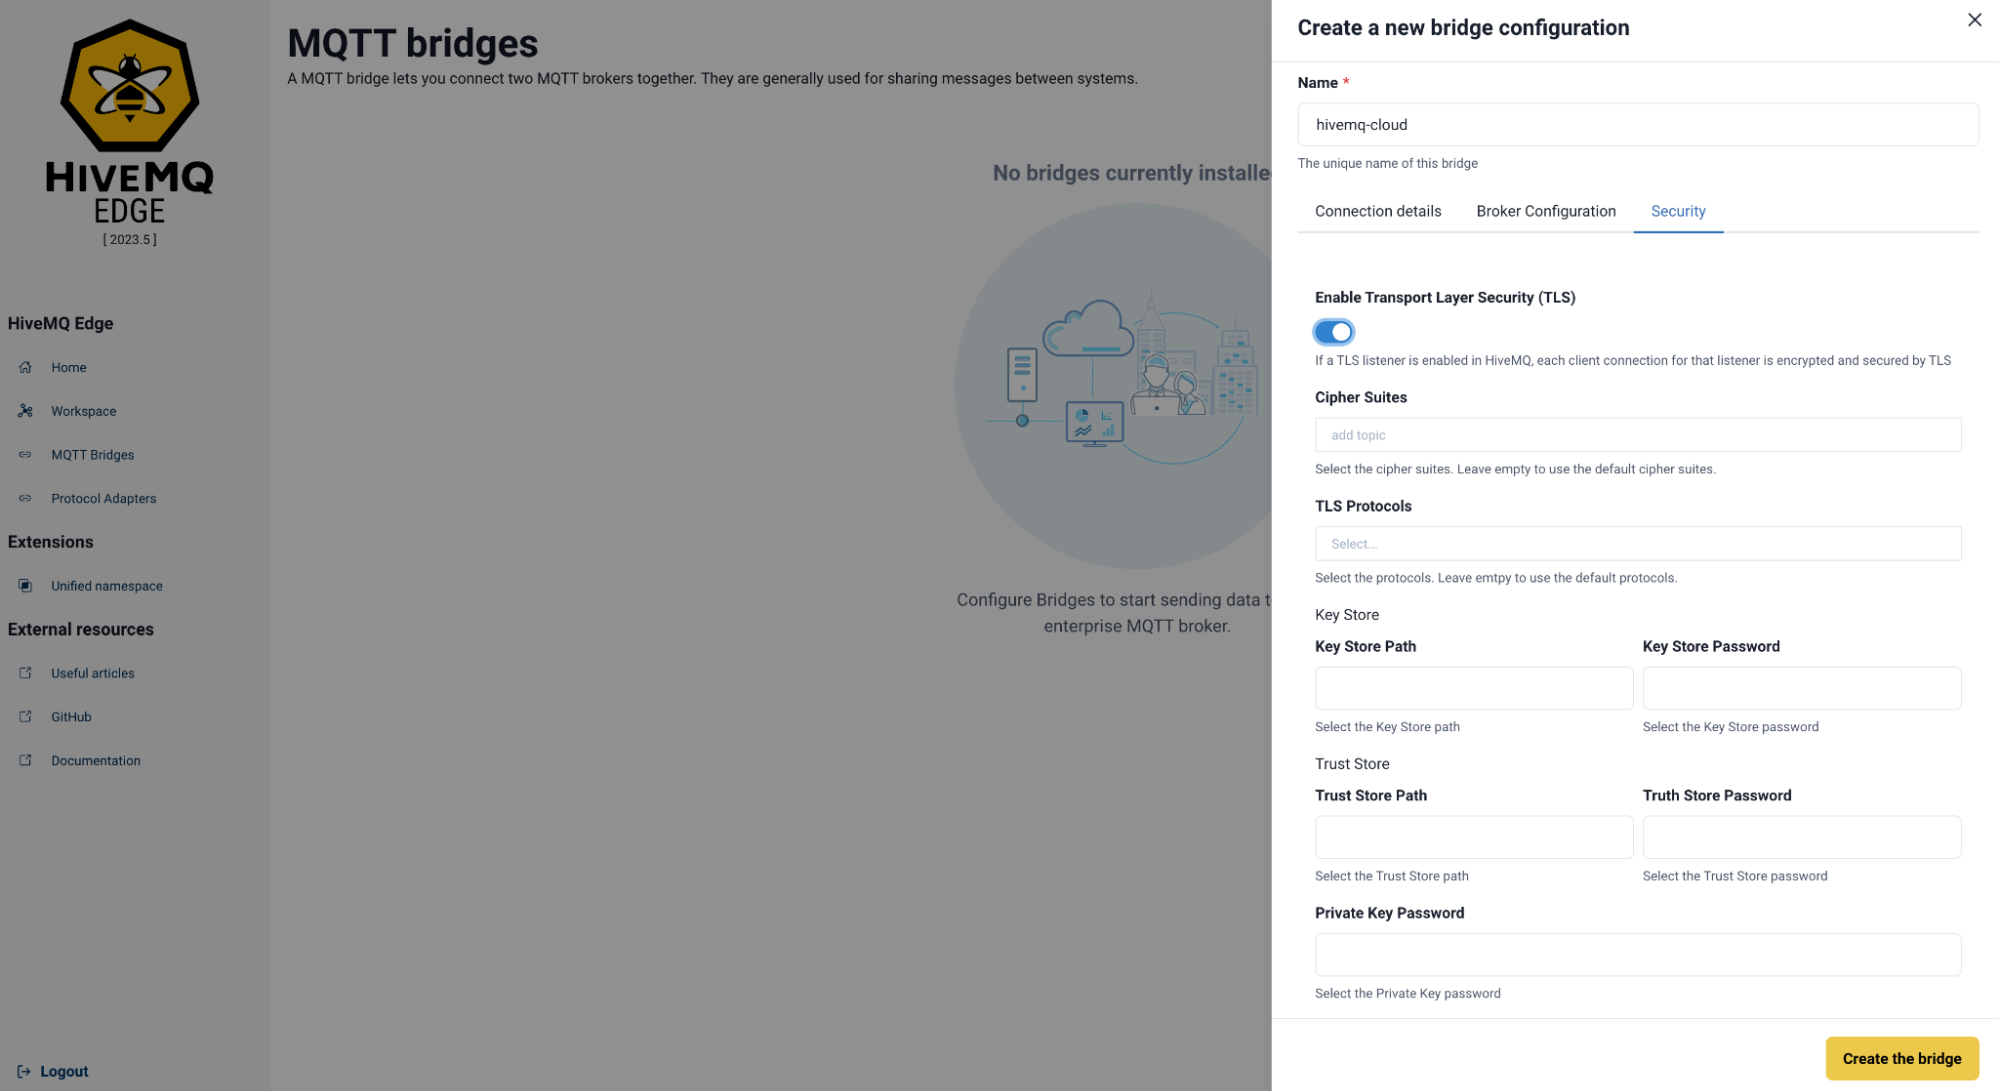 Proceed to Security After HiveMQ Edge and HiveMQ Cloud Bridge Connection